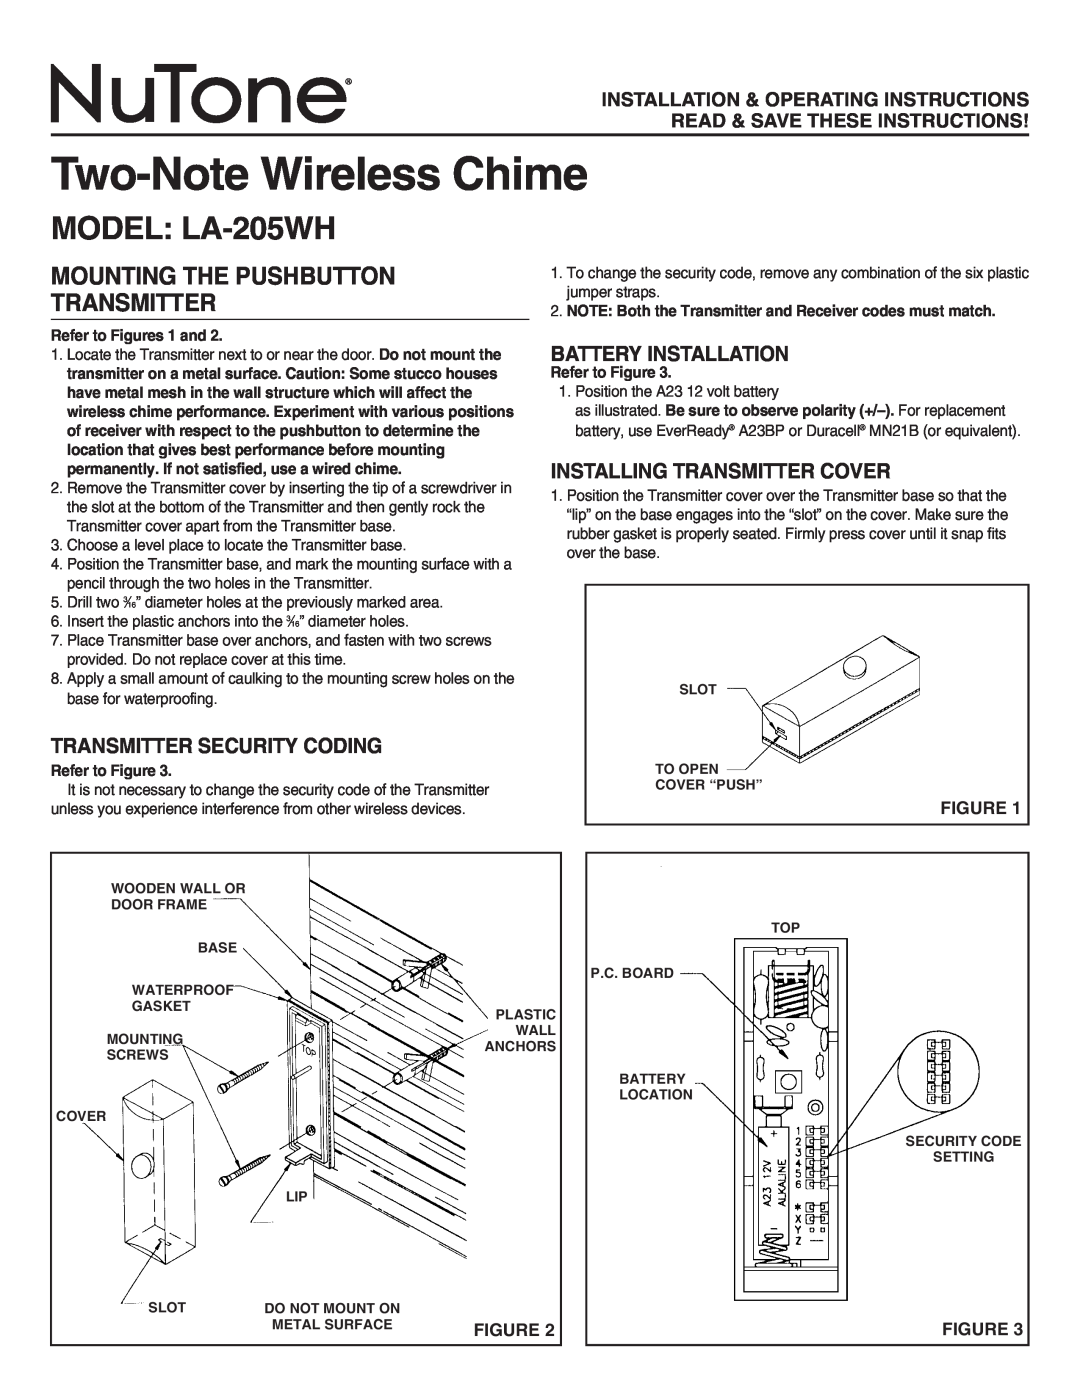 NuTone manual Two-NoteWireless Chime, MODEL LA-205WH, Mounting The Pushbutton Transmitter, Battery Installation 